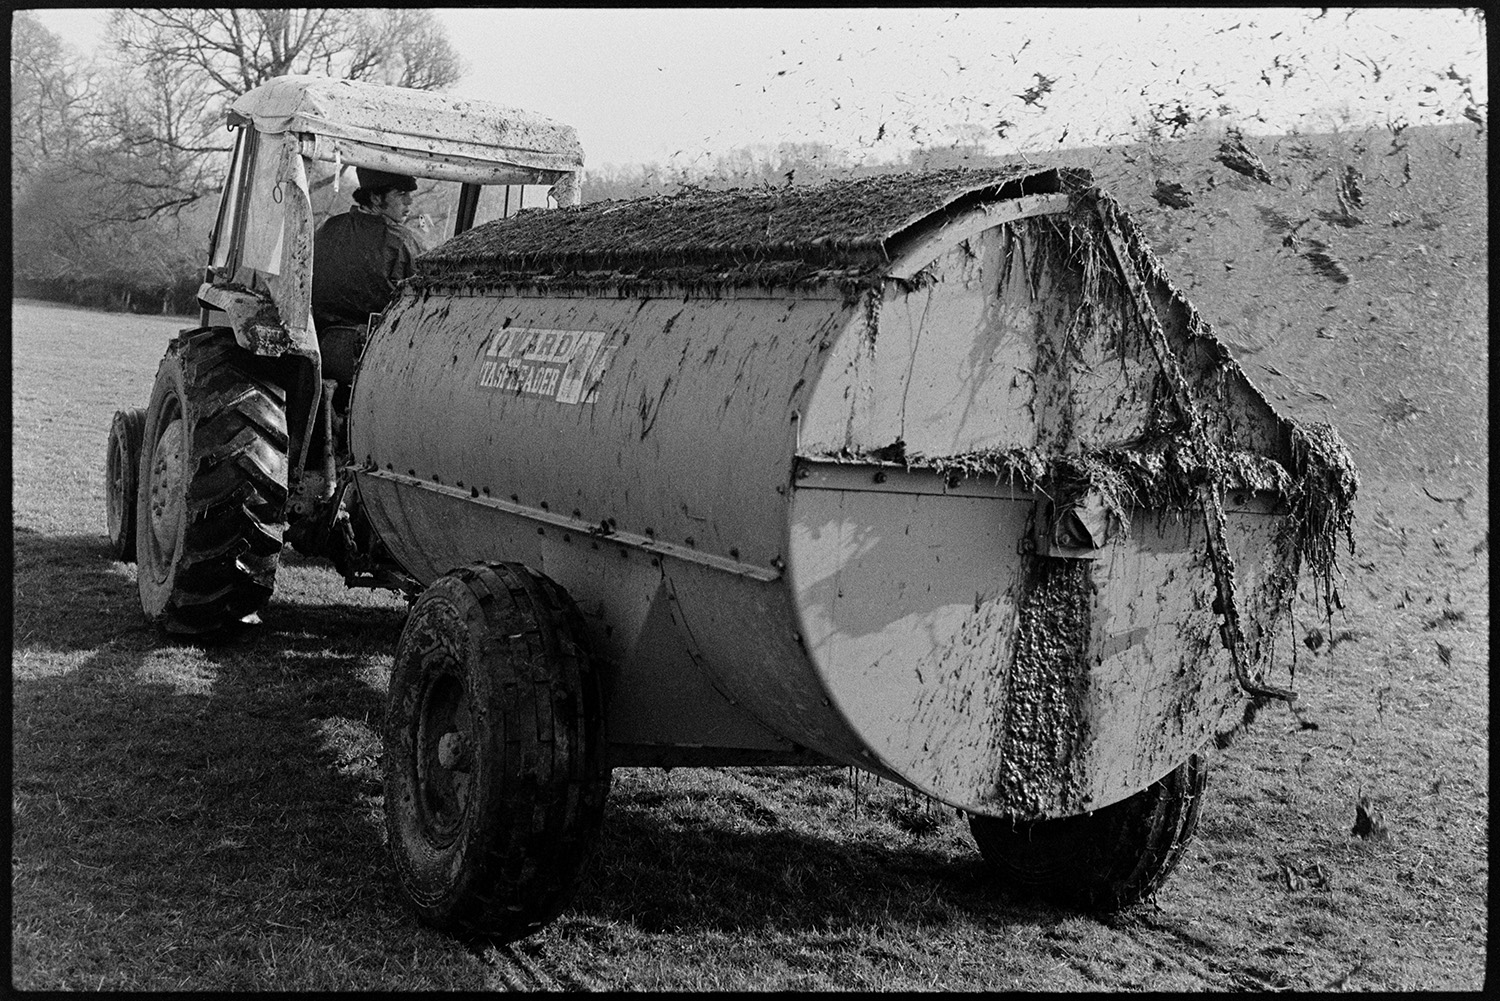 Muck spreader at work. 
[A member of the Ward family muckspreading in a field at Parsonage, Iddesleigh.]